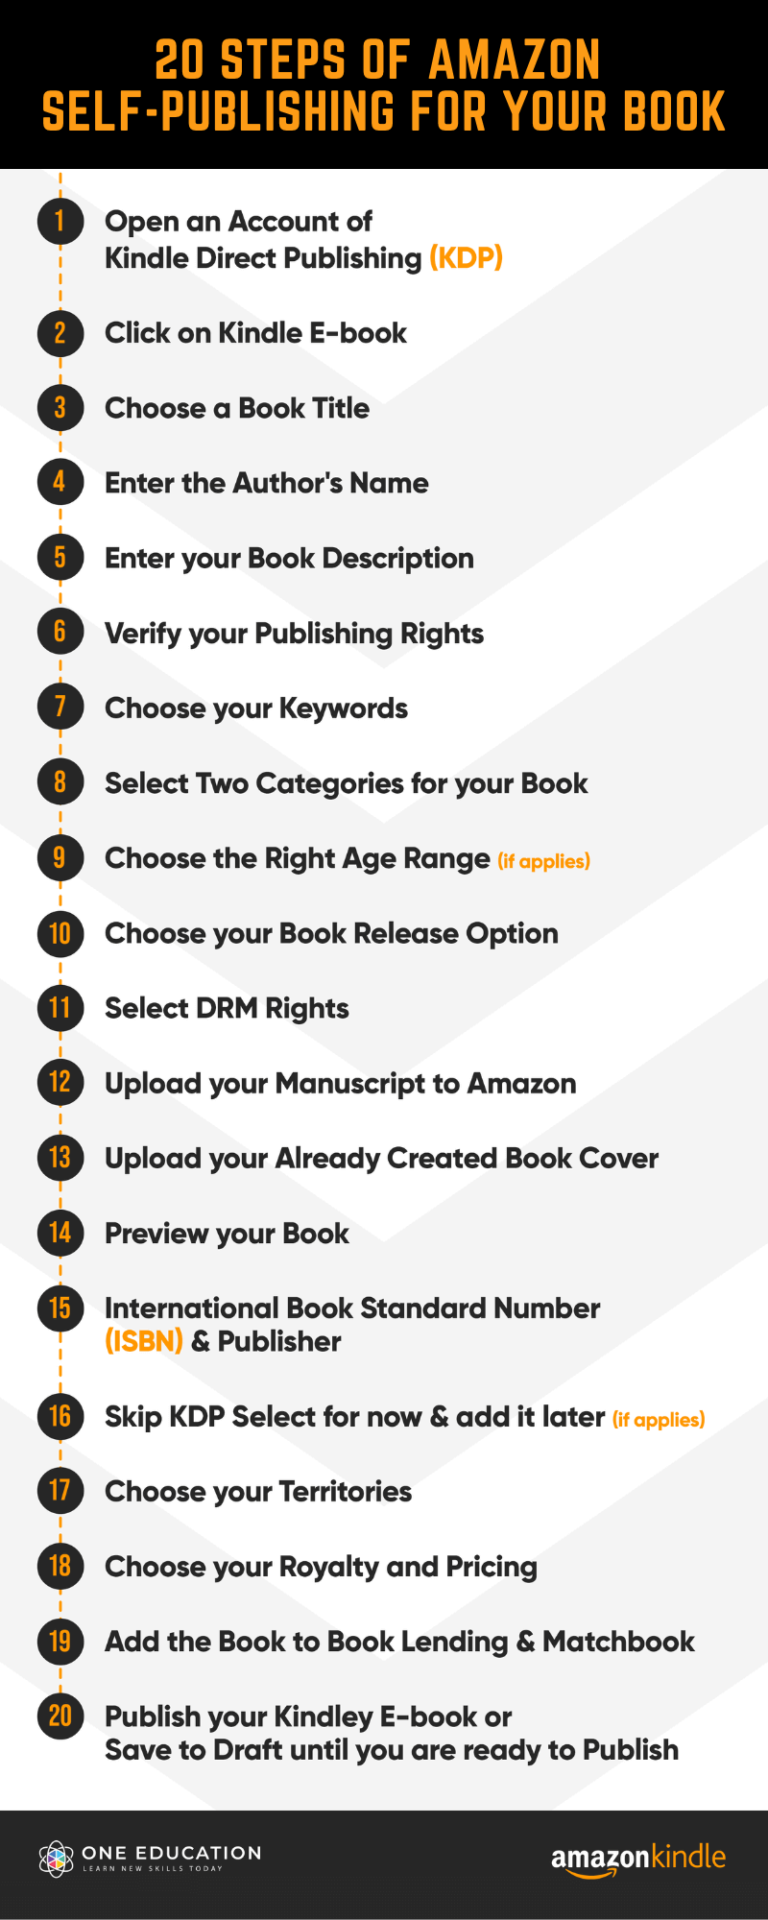 20 Steps of Amazon Self-Publishing for Your Book